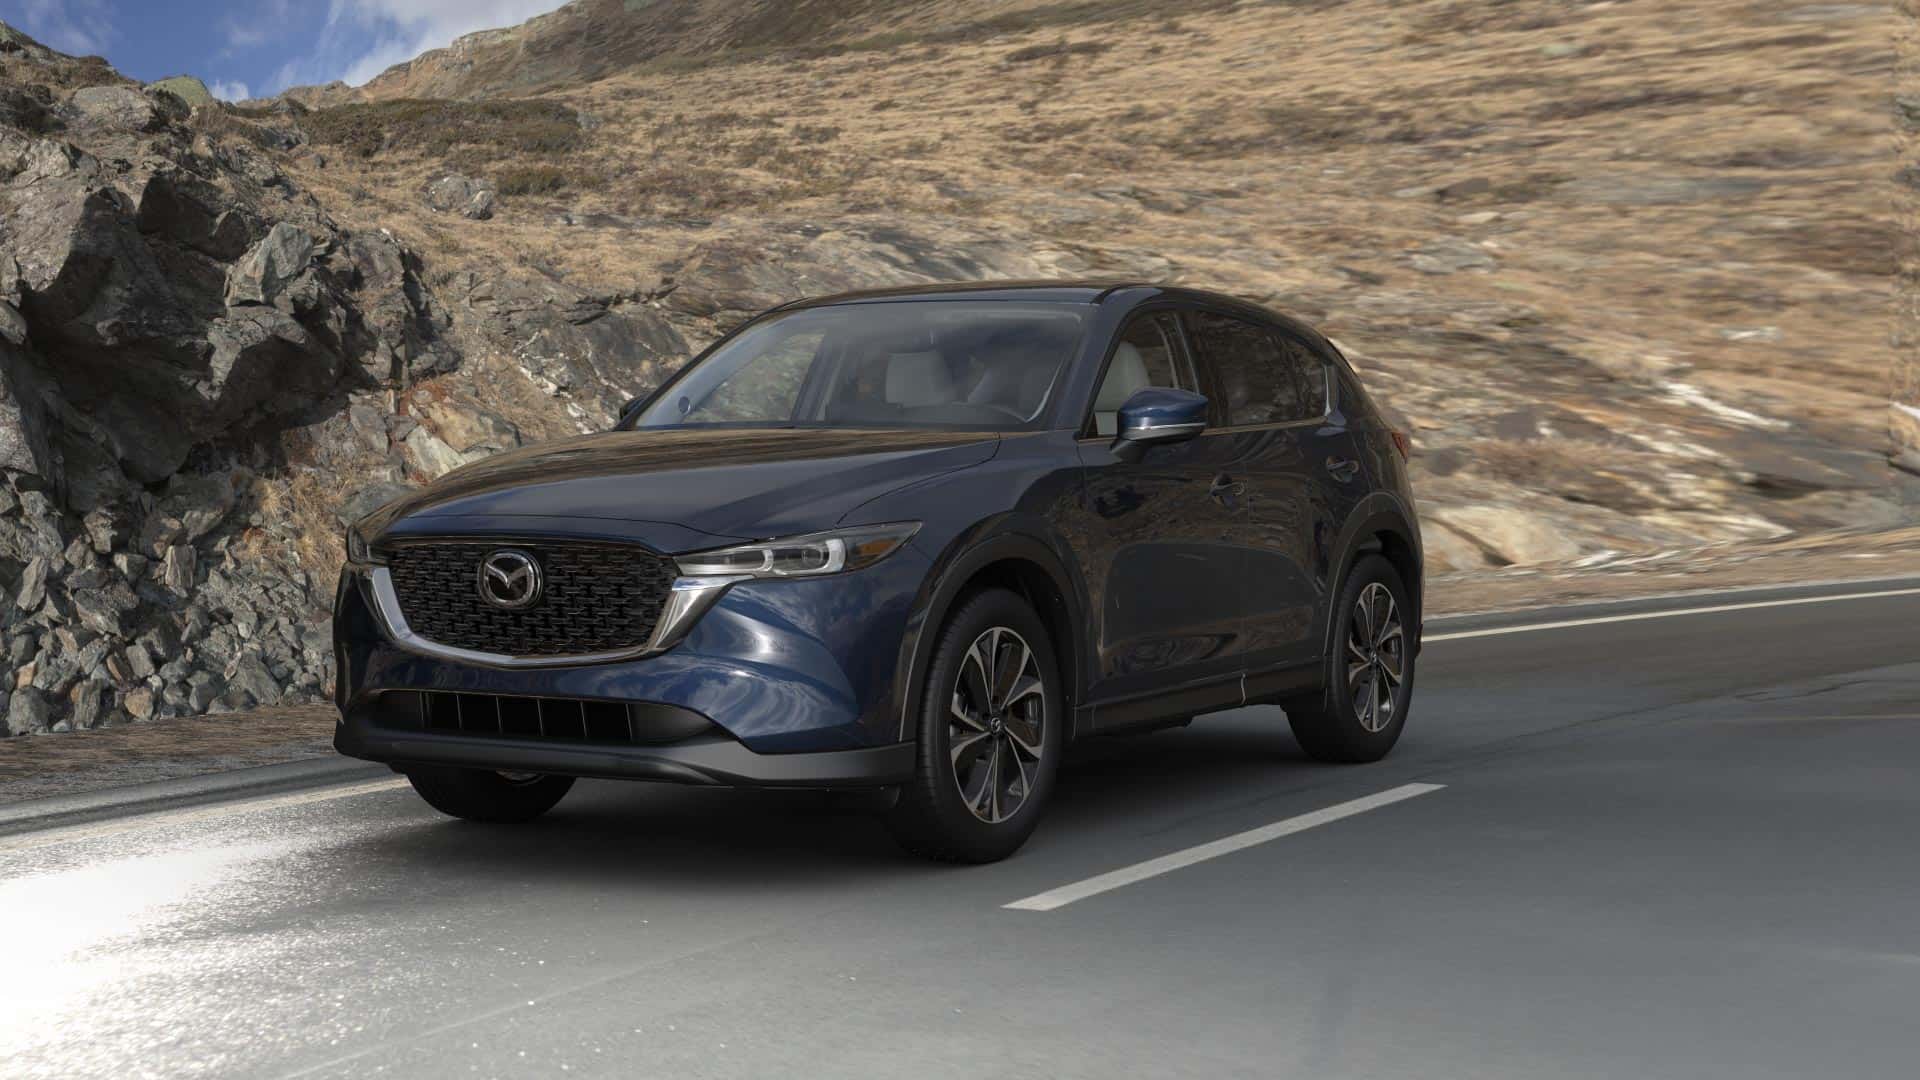 2023 Mazda CX-5 2.5 S Premium Plus Deep Crystal Blue Mica | Mazda of South Charlotte in Pineville NC